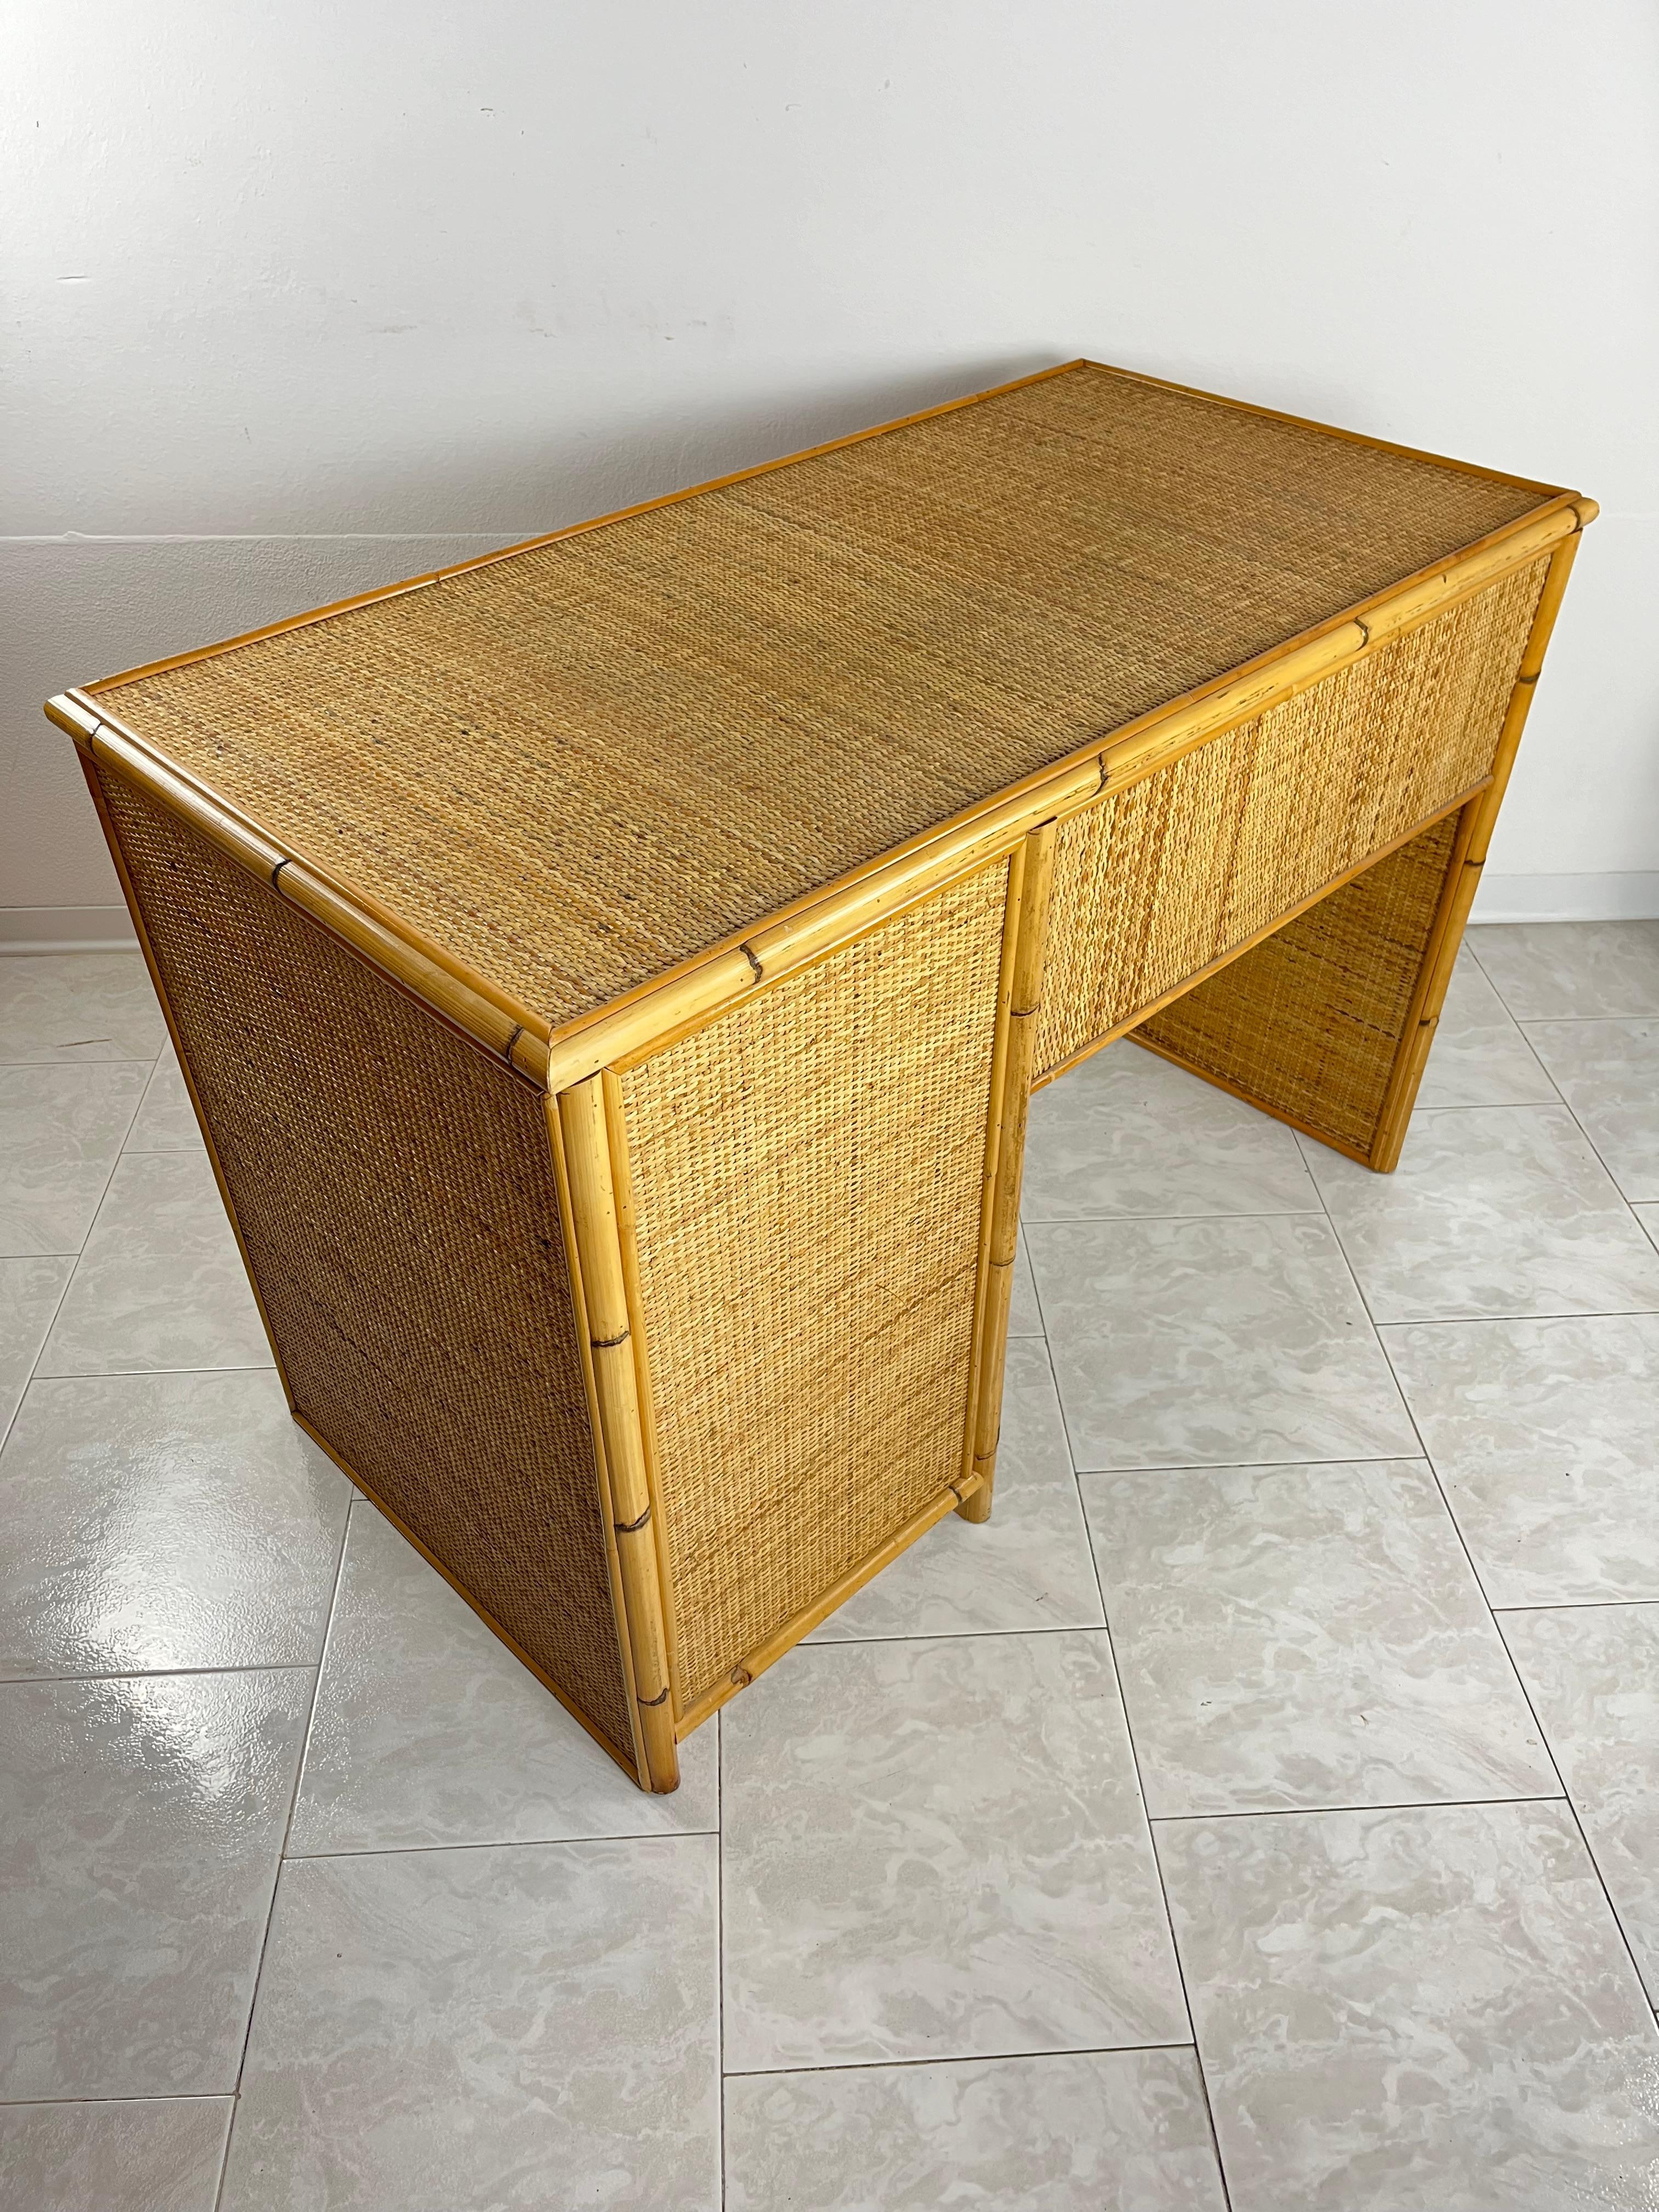 Mid-Century Rattan Wicker And Bamboo Desk Attributed To Dal Vera 1960s In Good Condition For Sale In Palermo, IT